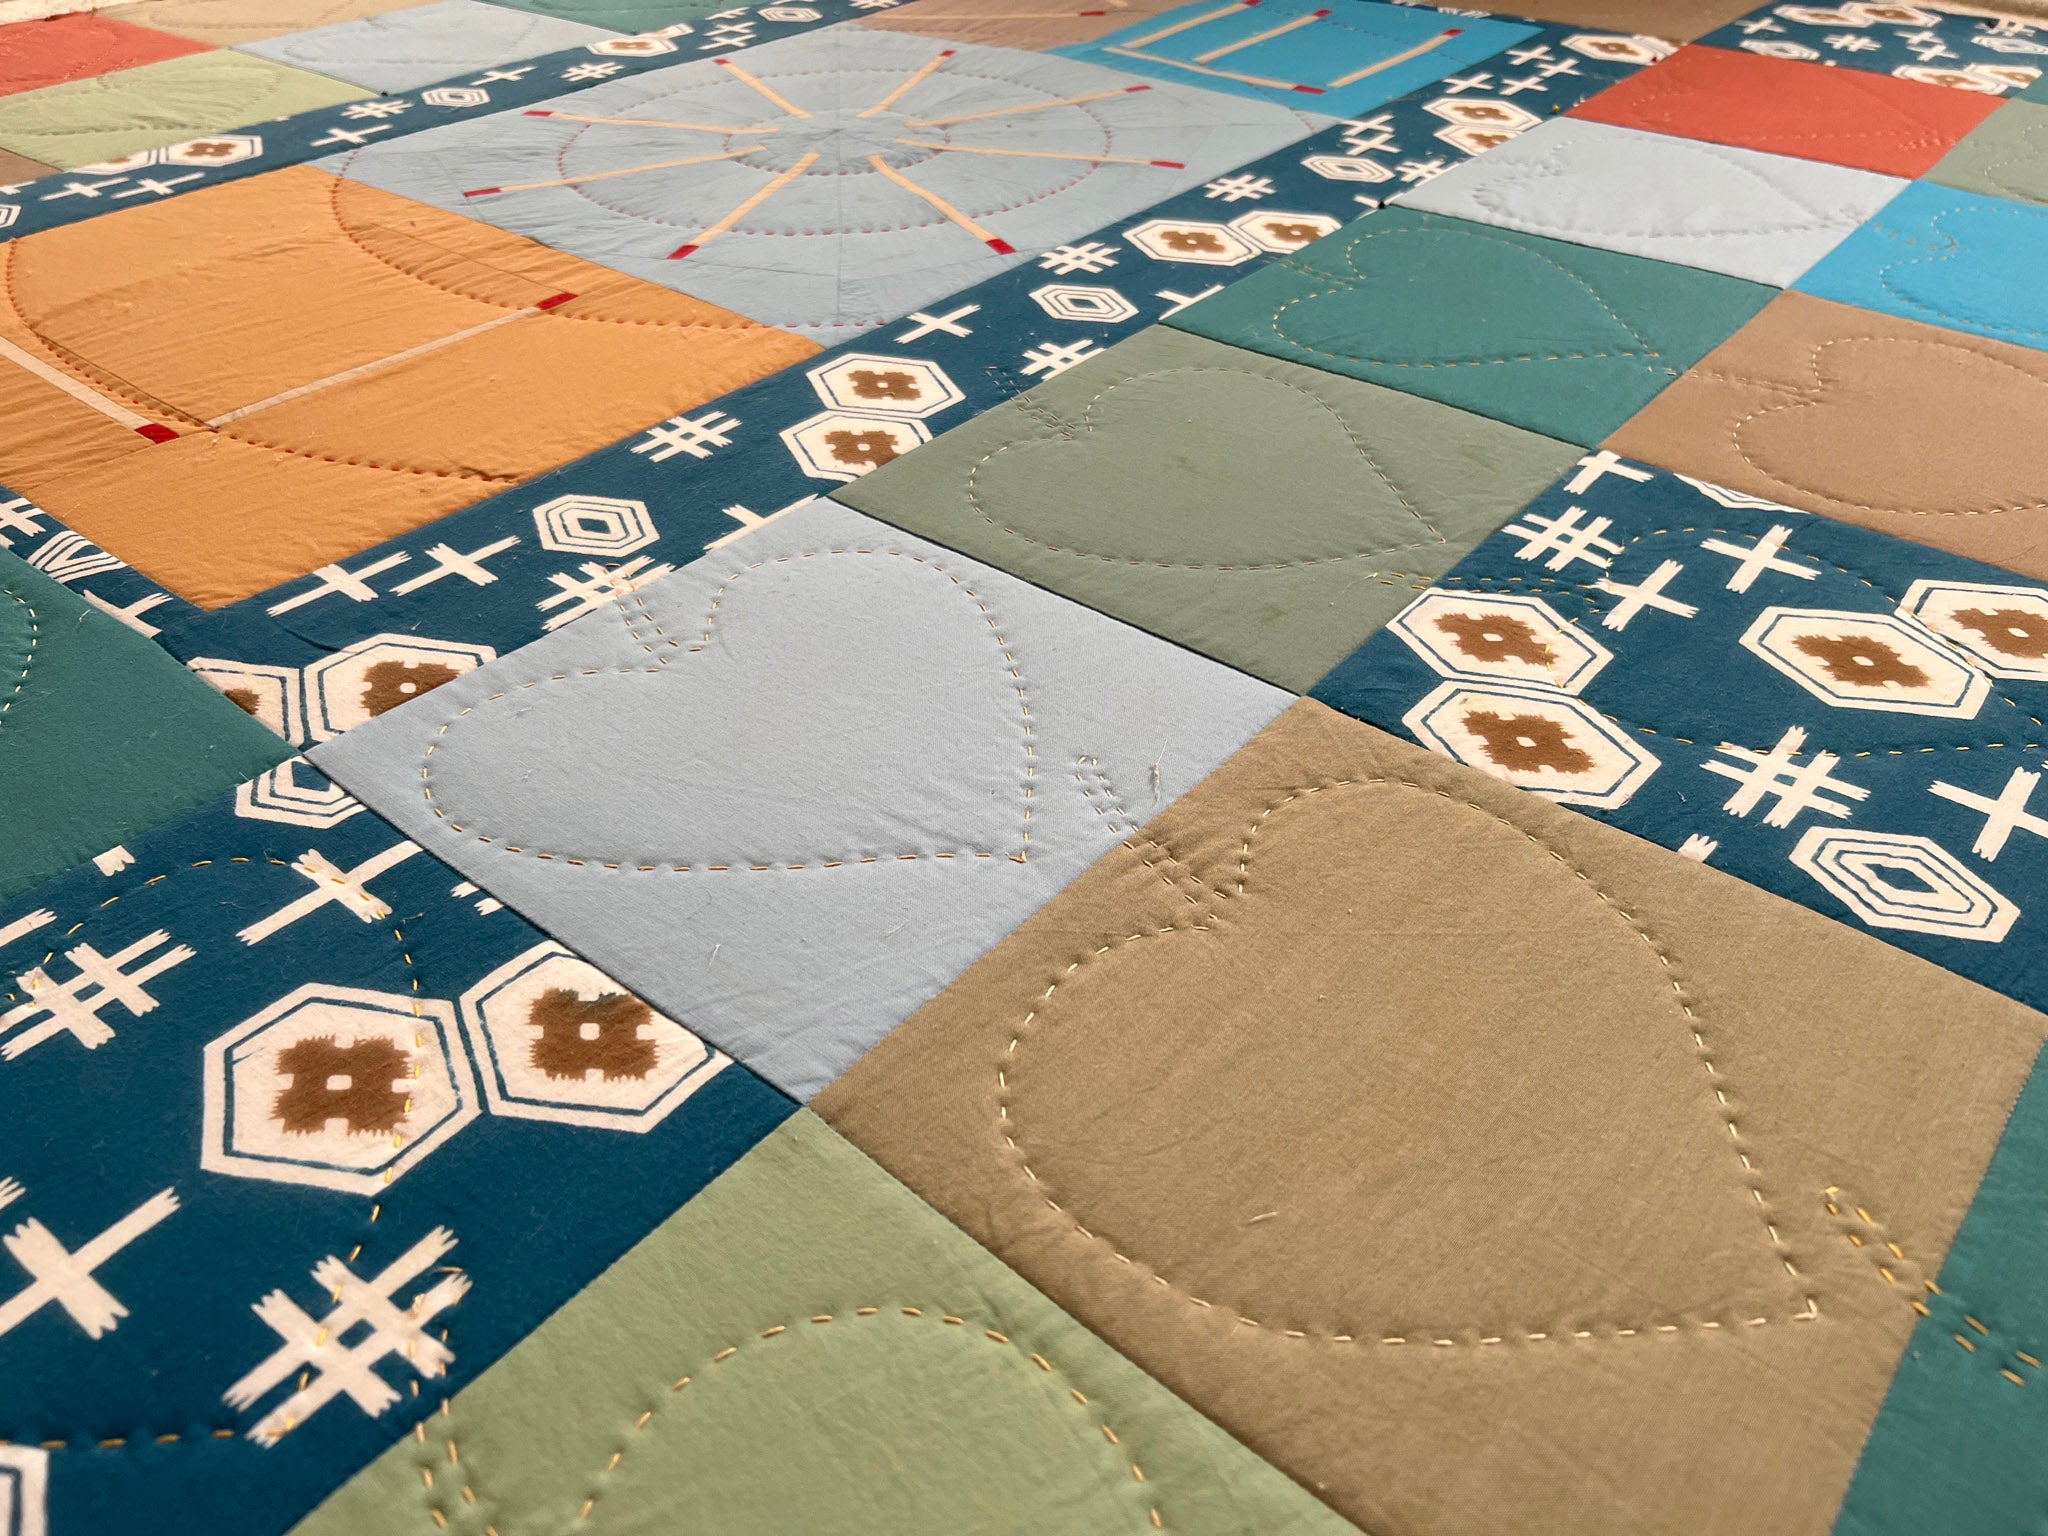 Quilt blocking process by Patricia Belyea of Okan Arts